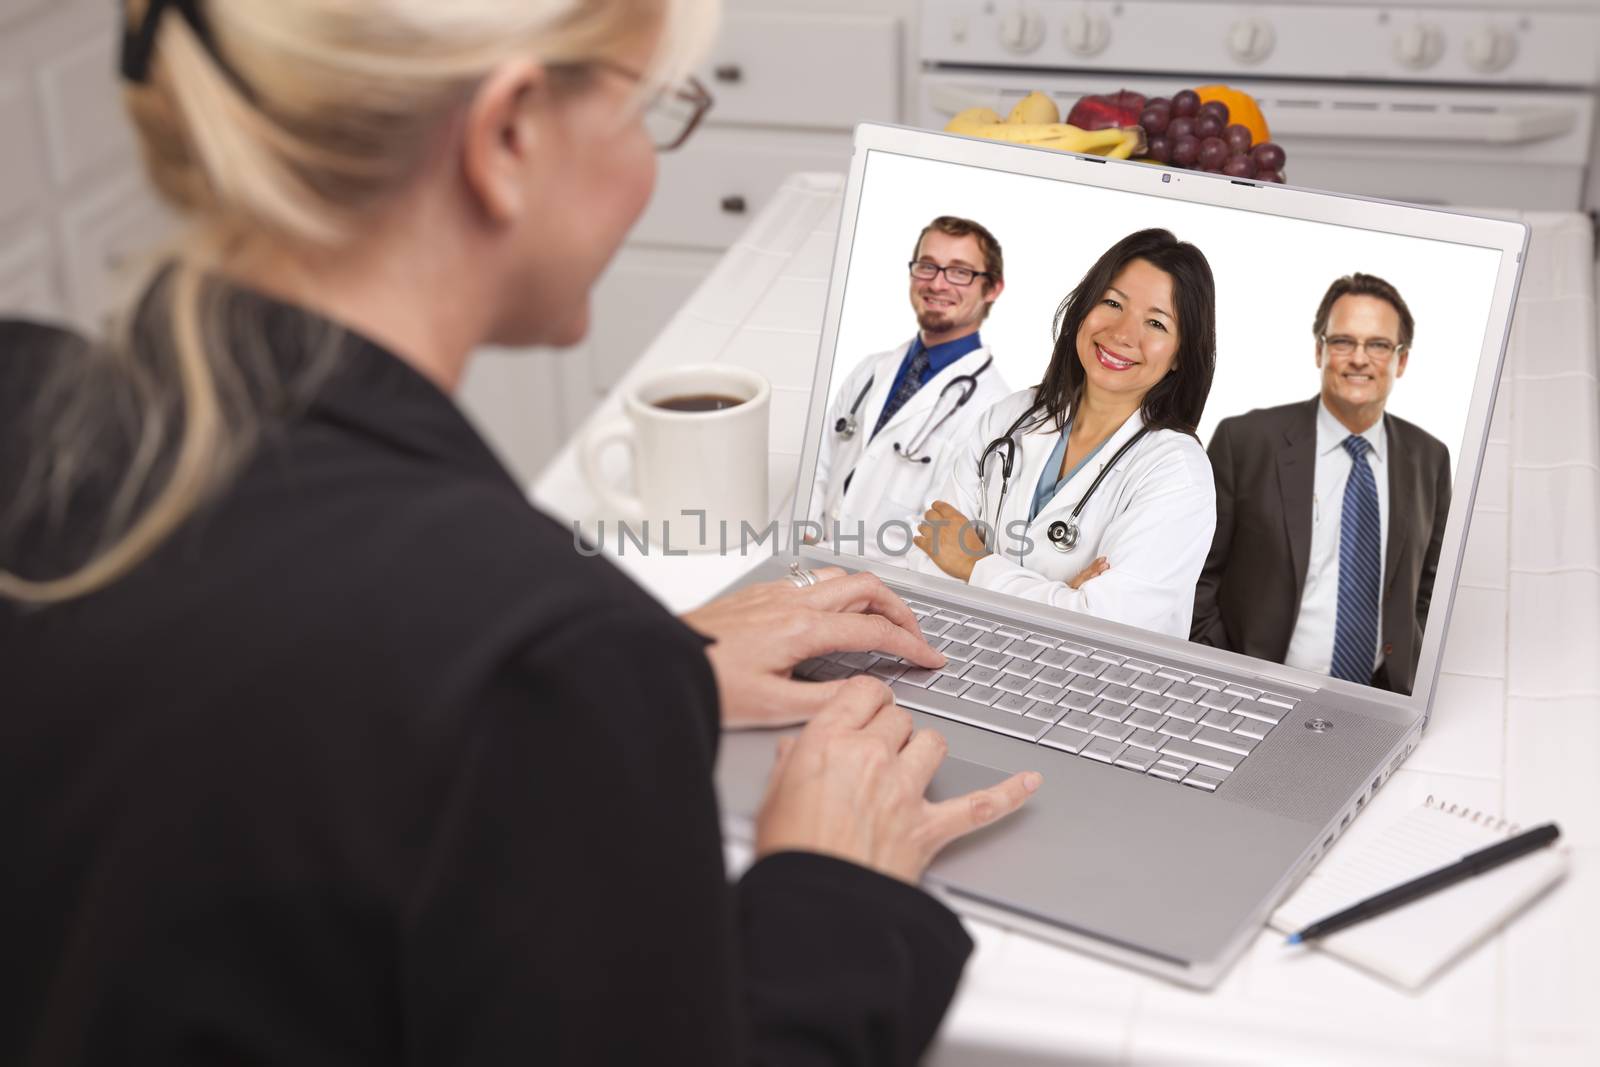 Woman In Kitchen Using Laptop, Online with Nurses or Doctors by Feverpitched